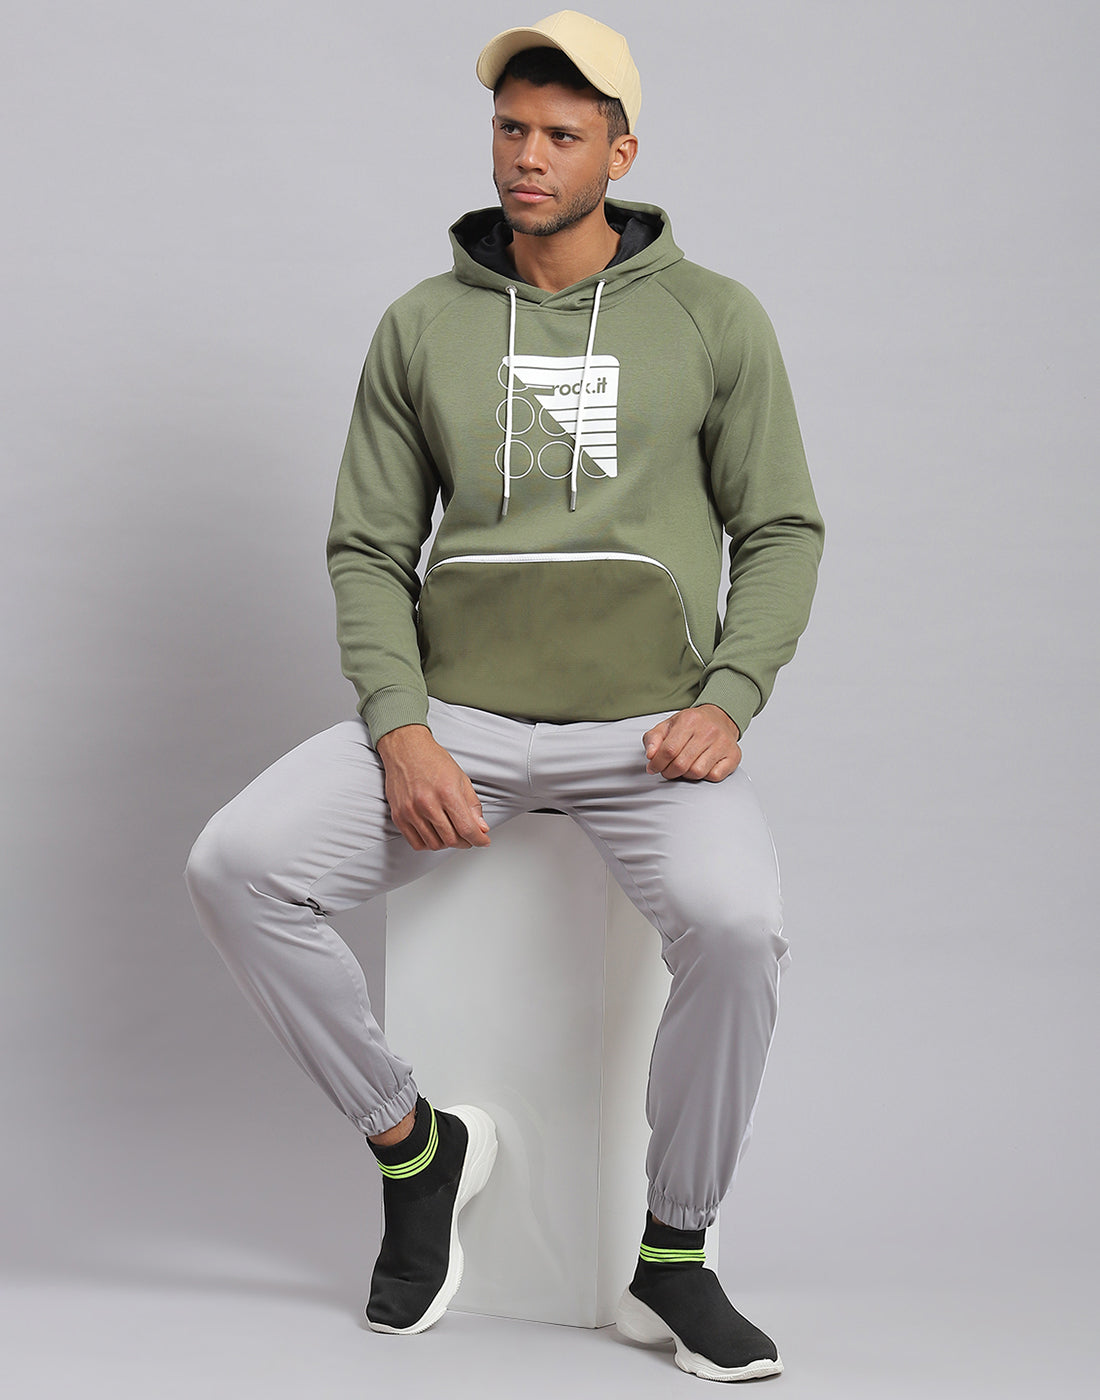 Buy Thick Sweatpants Online In India -  India